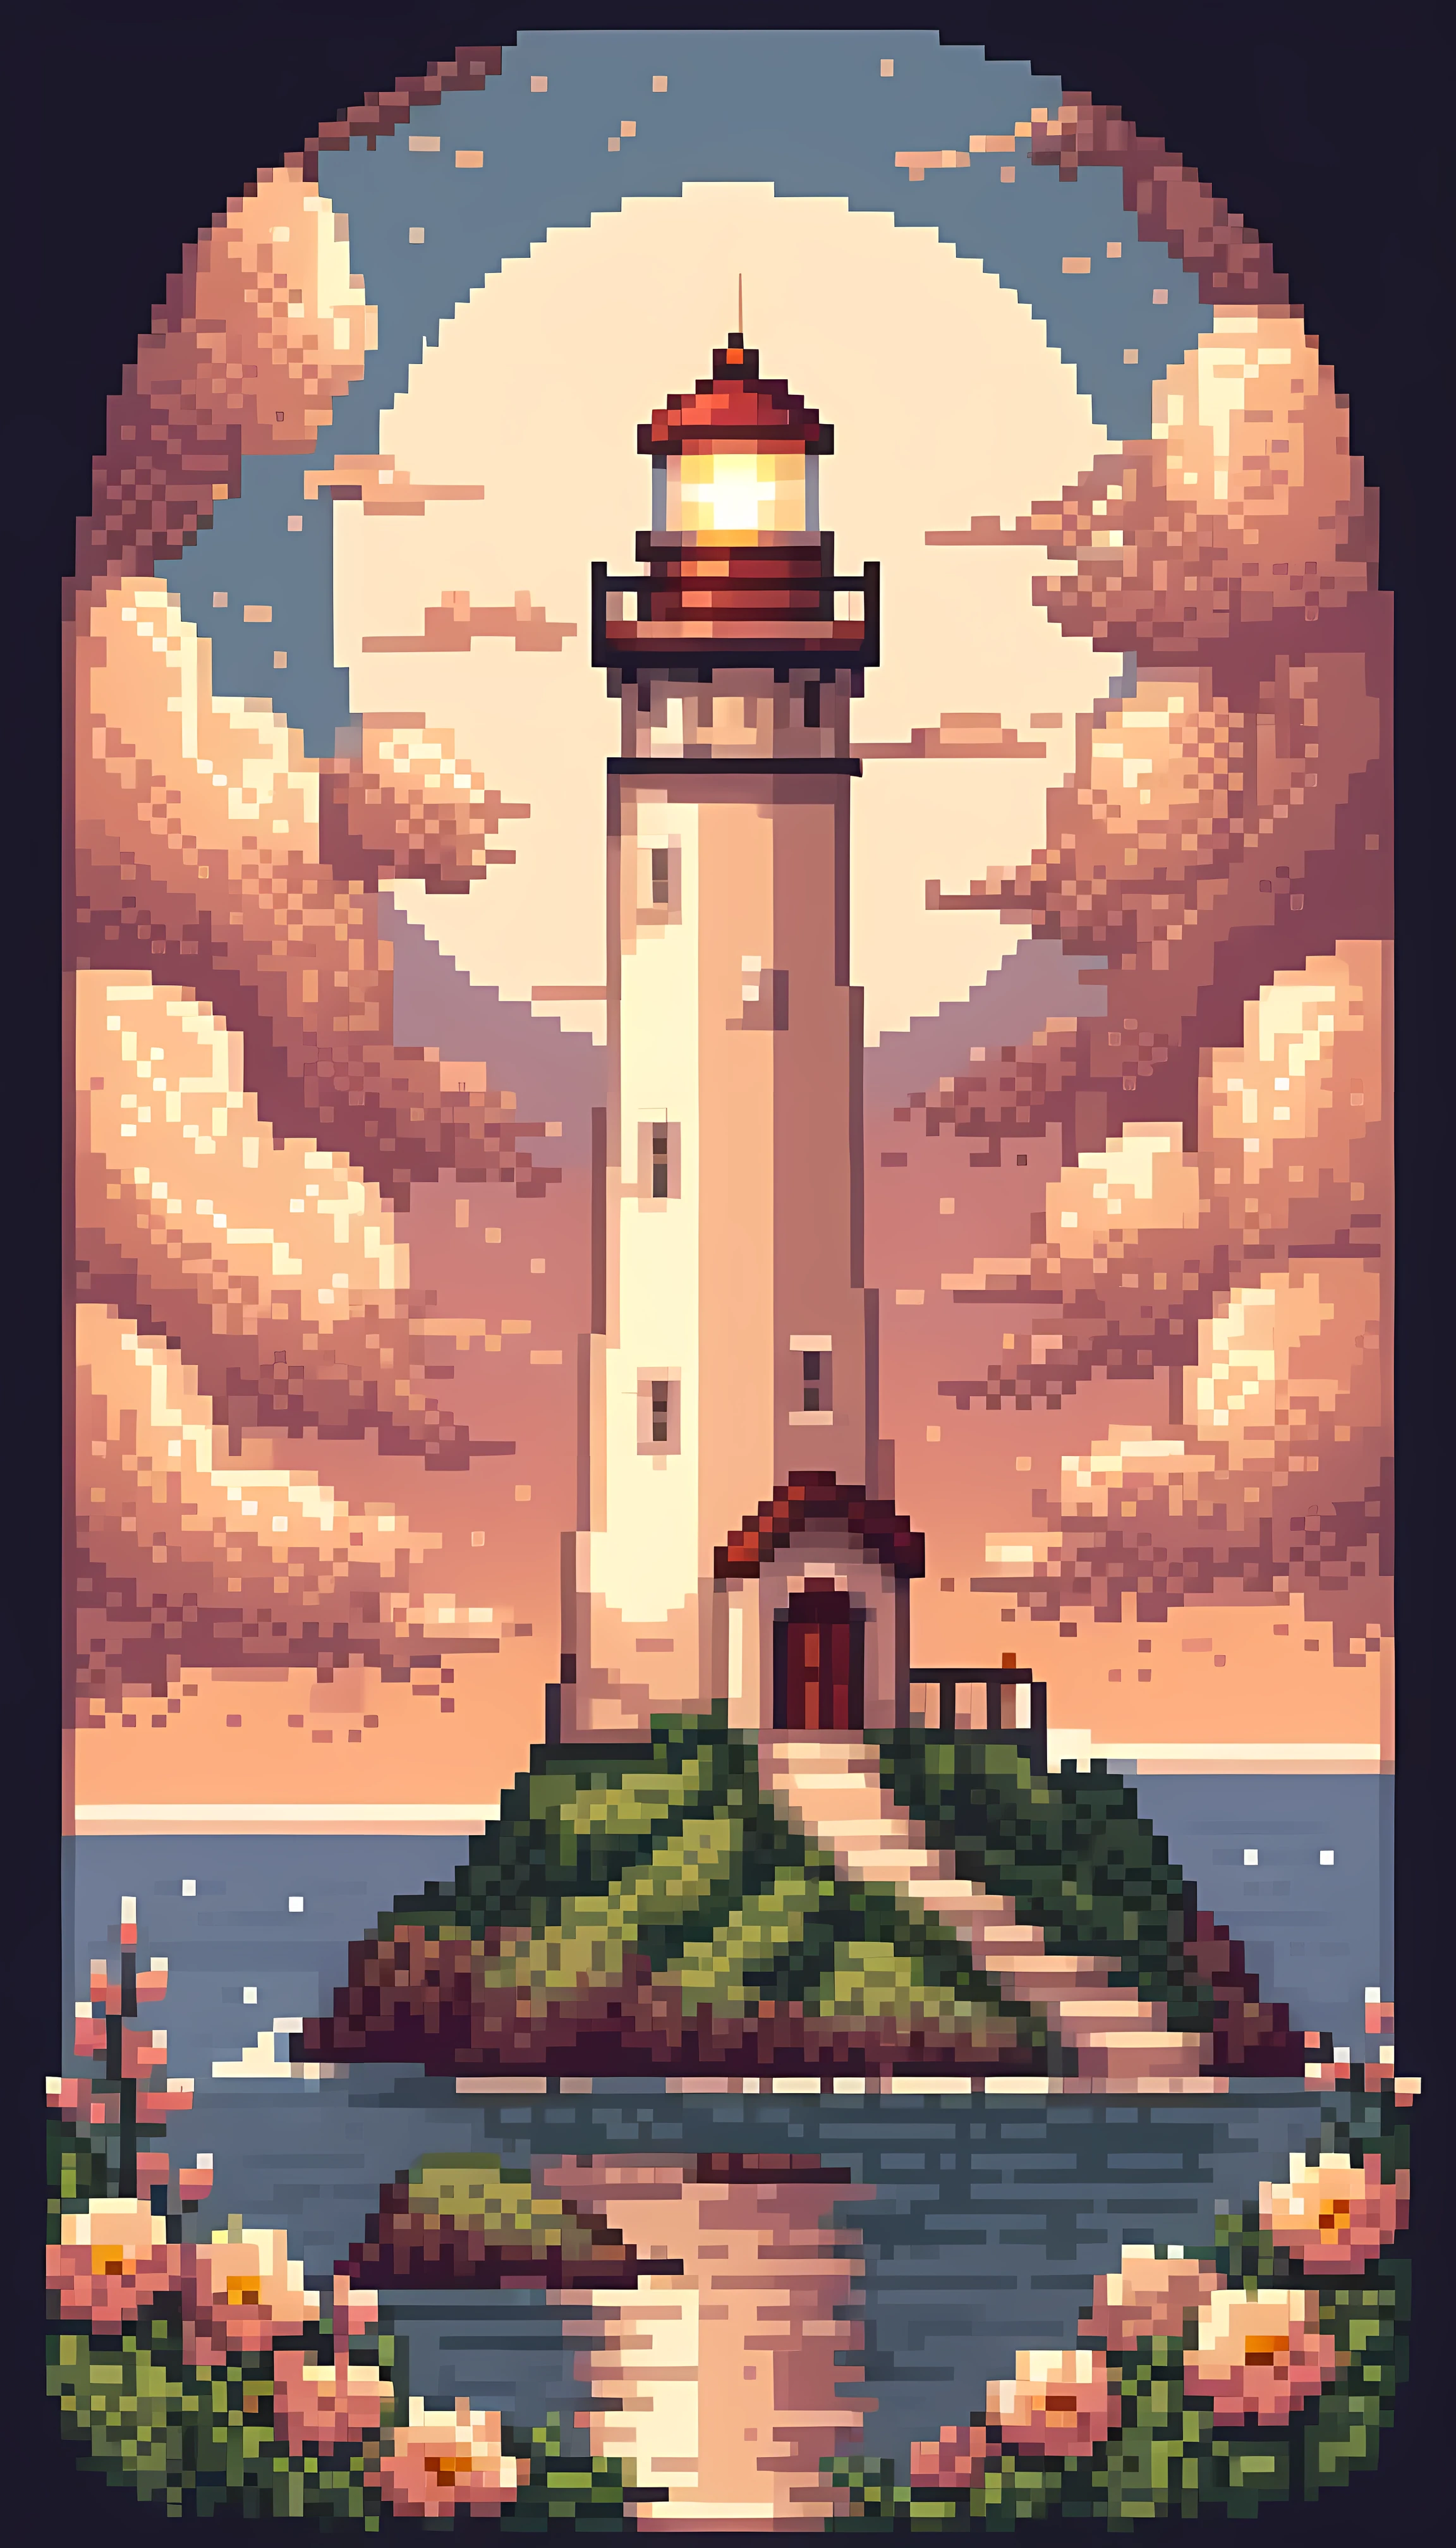 Pixel art, masterpiece in maximum 16K resolution, superb quality, a dreamy lighthouse featuring a towering structure with floral elements, intricate mechanisms, warm glowing light, romantic clouds, soft color palette, fine linework and embellishments, retro-futuristic design. | ((More_Detail))